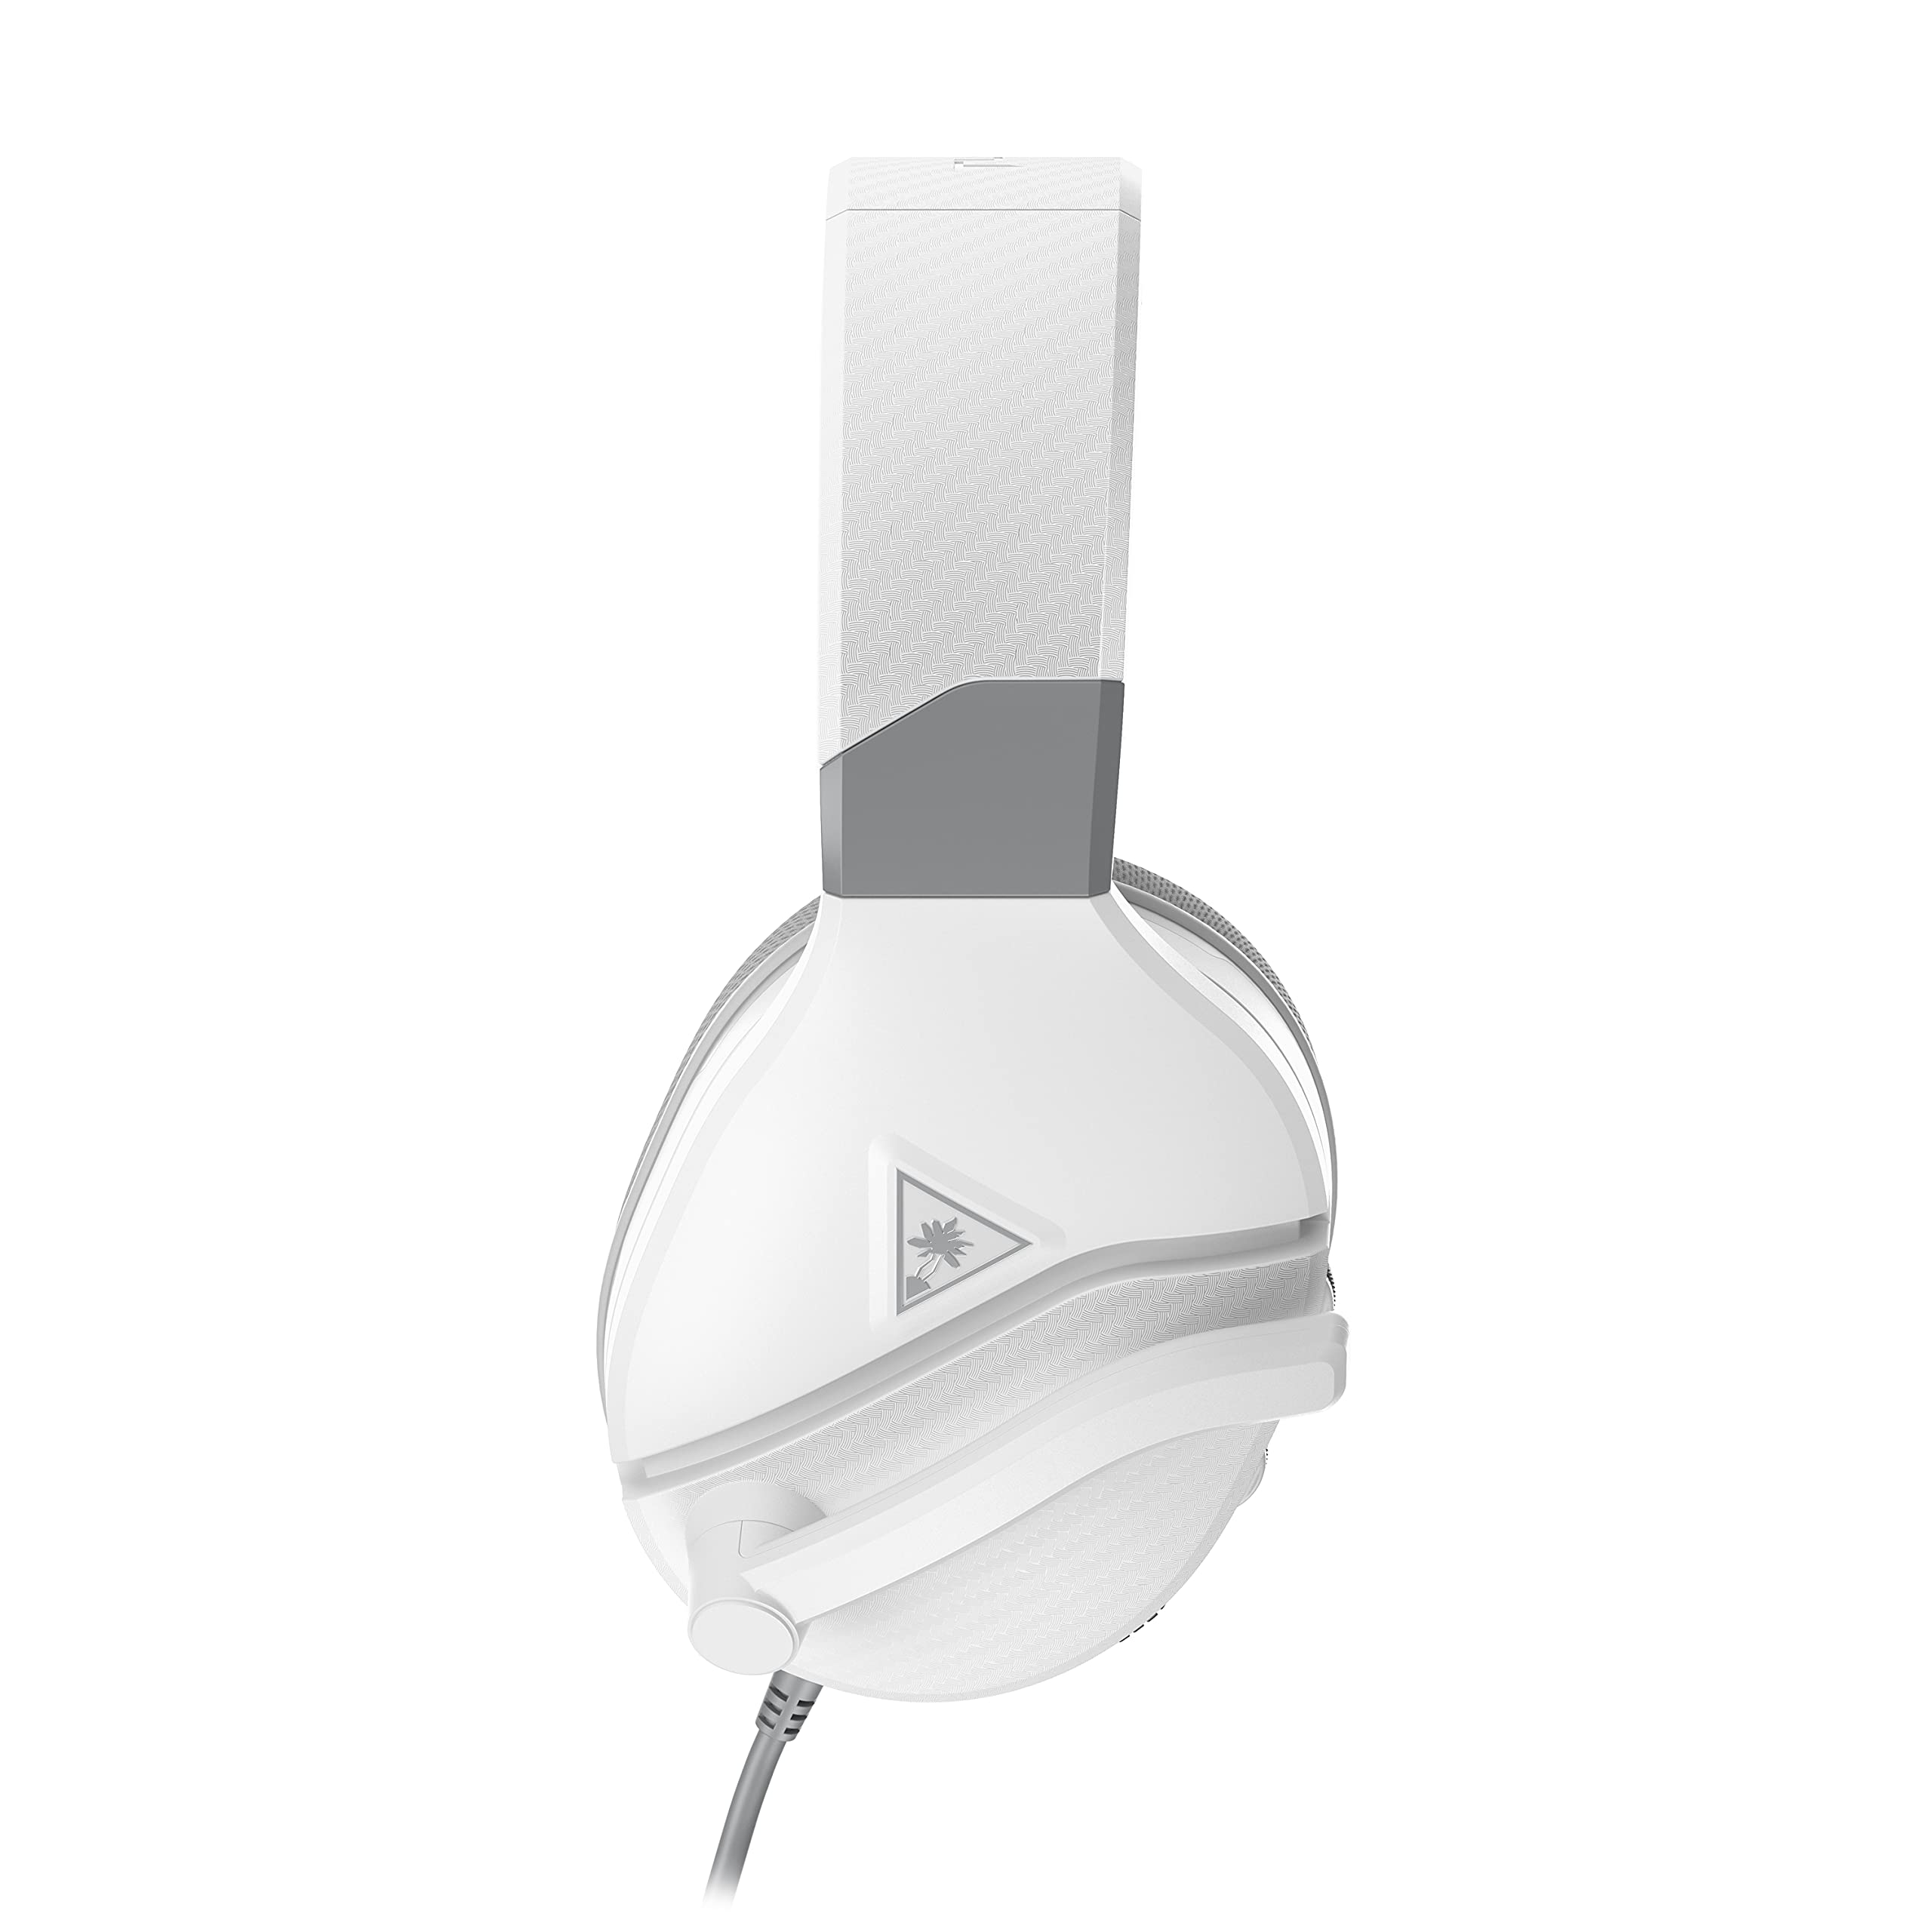 Turtle Beach Recon 200 Gen 2 Powered Gaming Headset for Xbox Series X, Xbox Series S, & Xbox One, PlayStation 5, PS4, Nintendo Switch, Mobile, & PC with 3.5mm connection - White